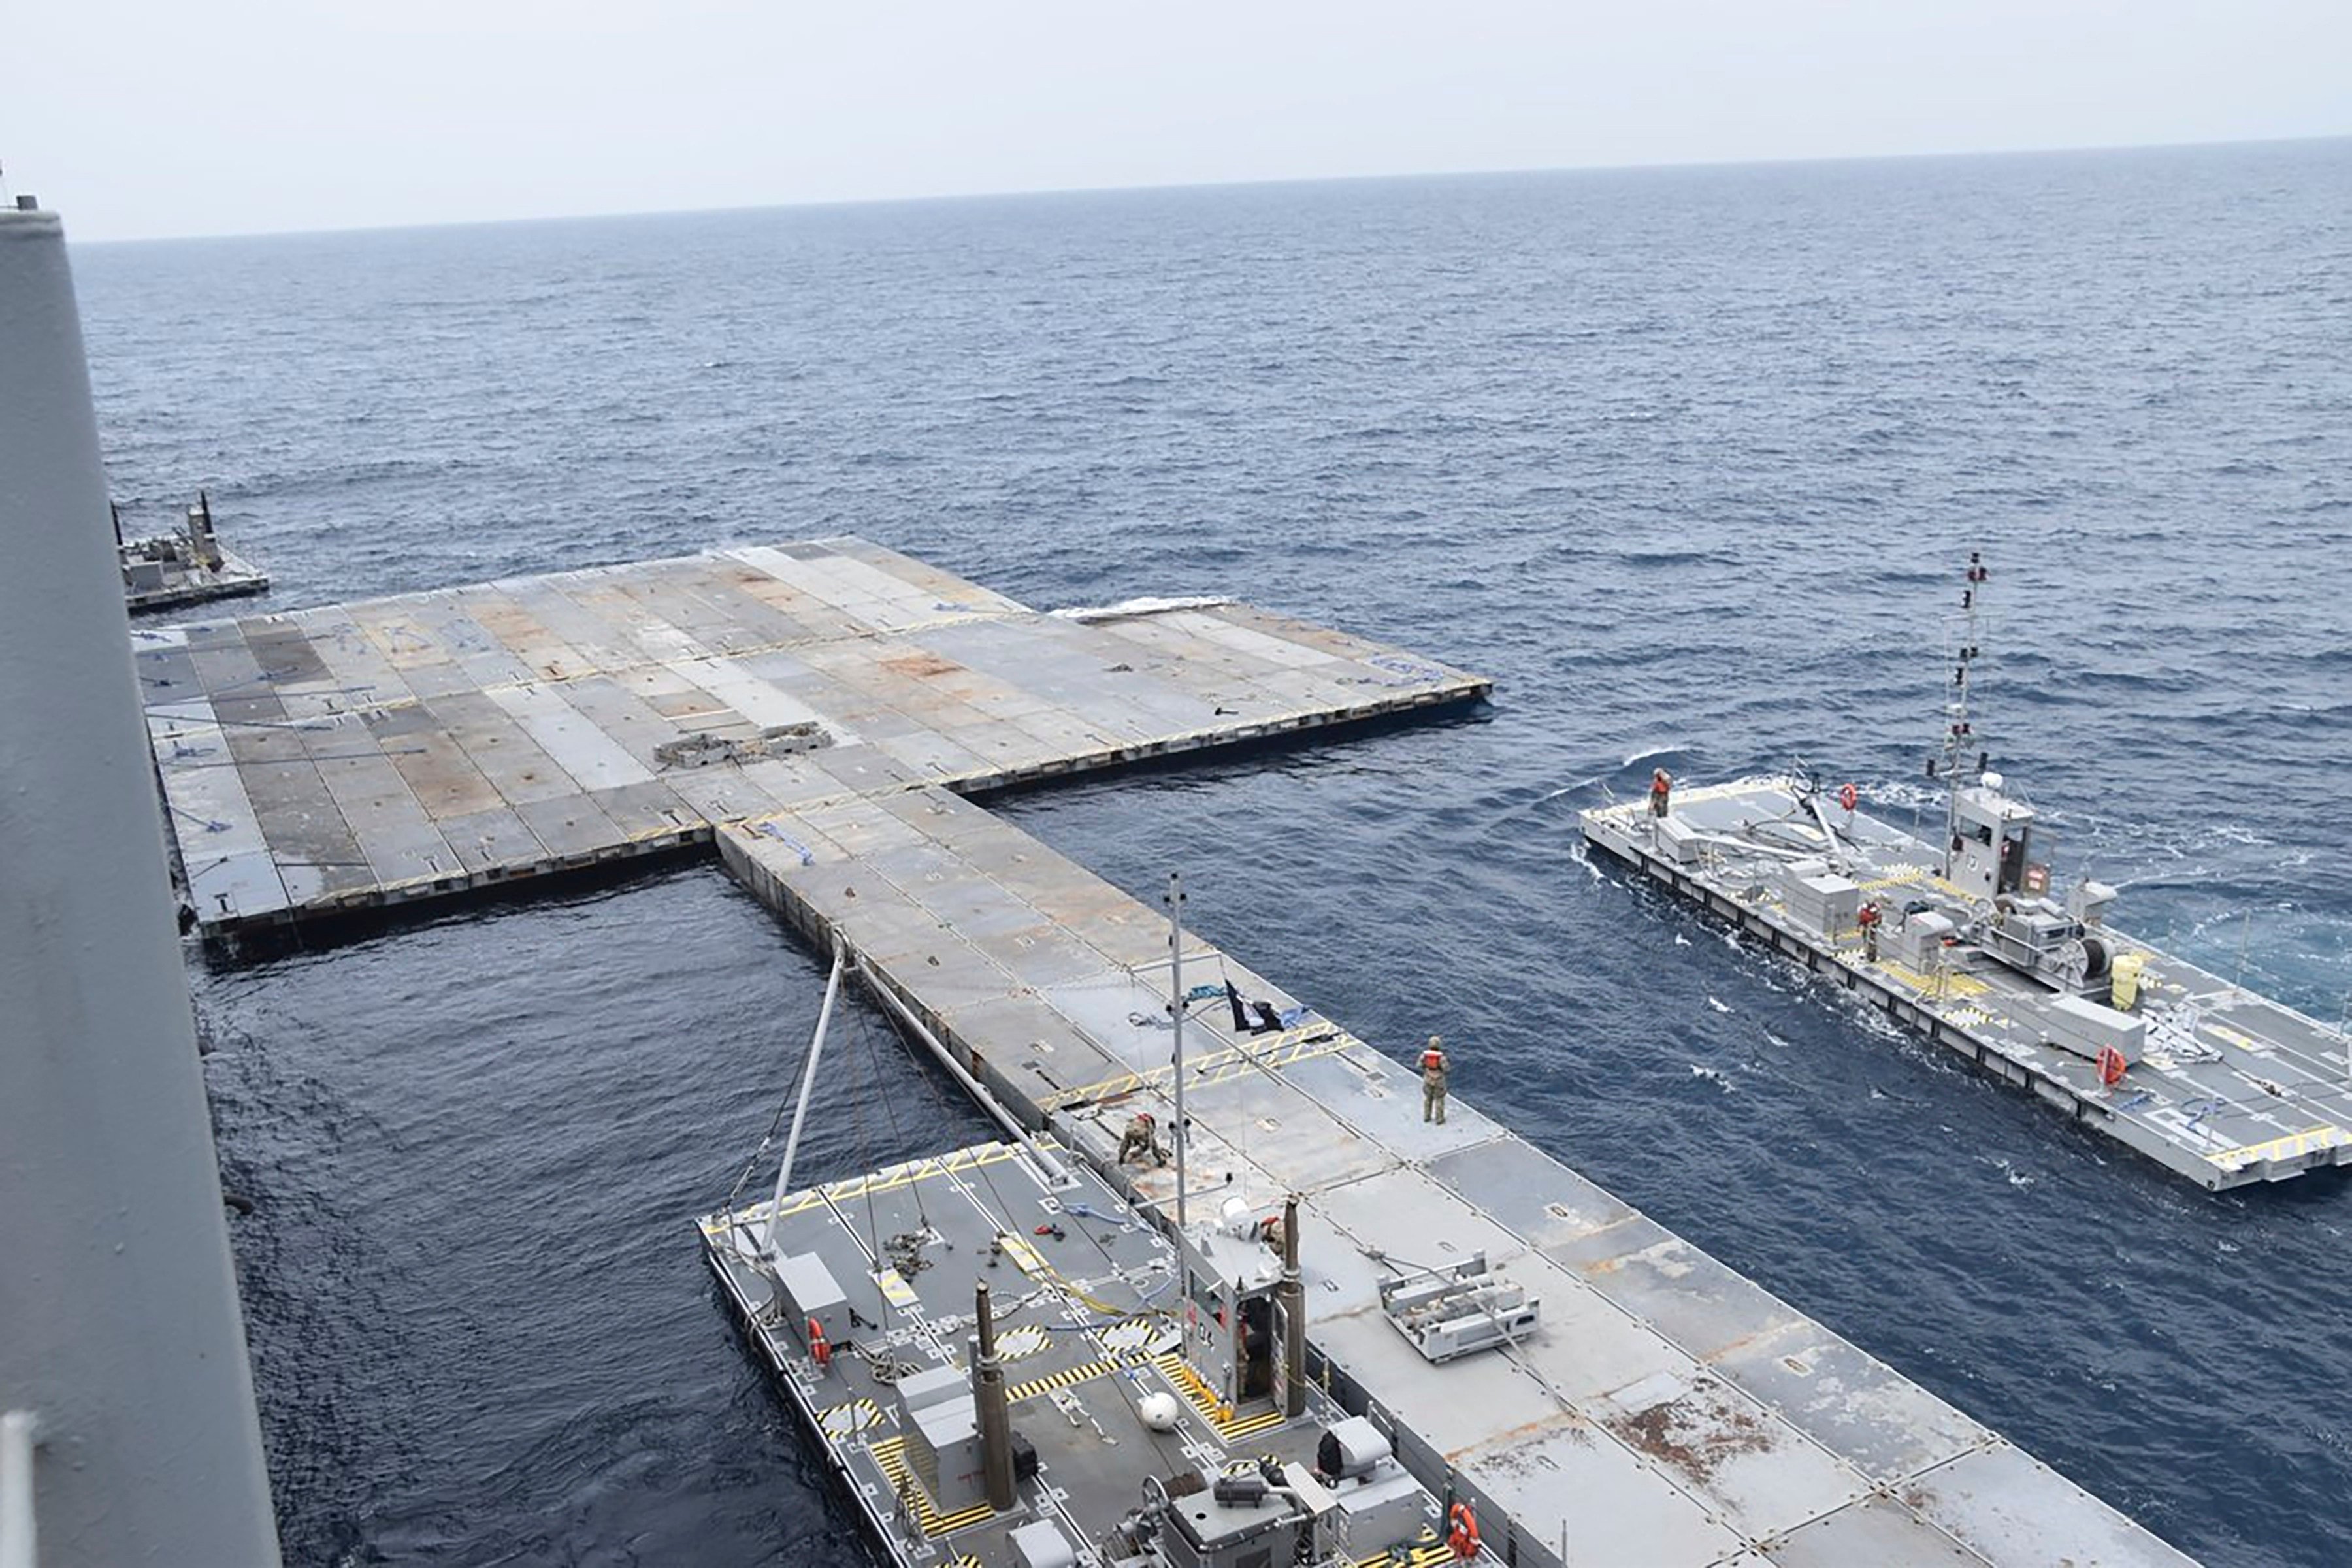 Construction of a floating pier in the Mediterranean Sea off the Gaza Strip. Photo: US Central Command via AP